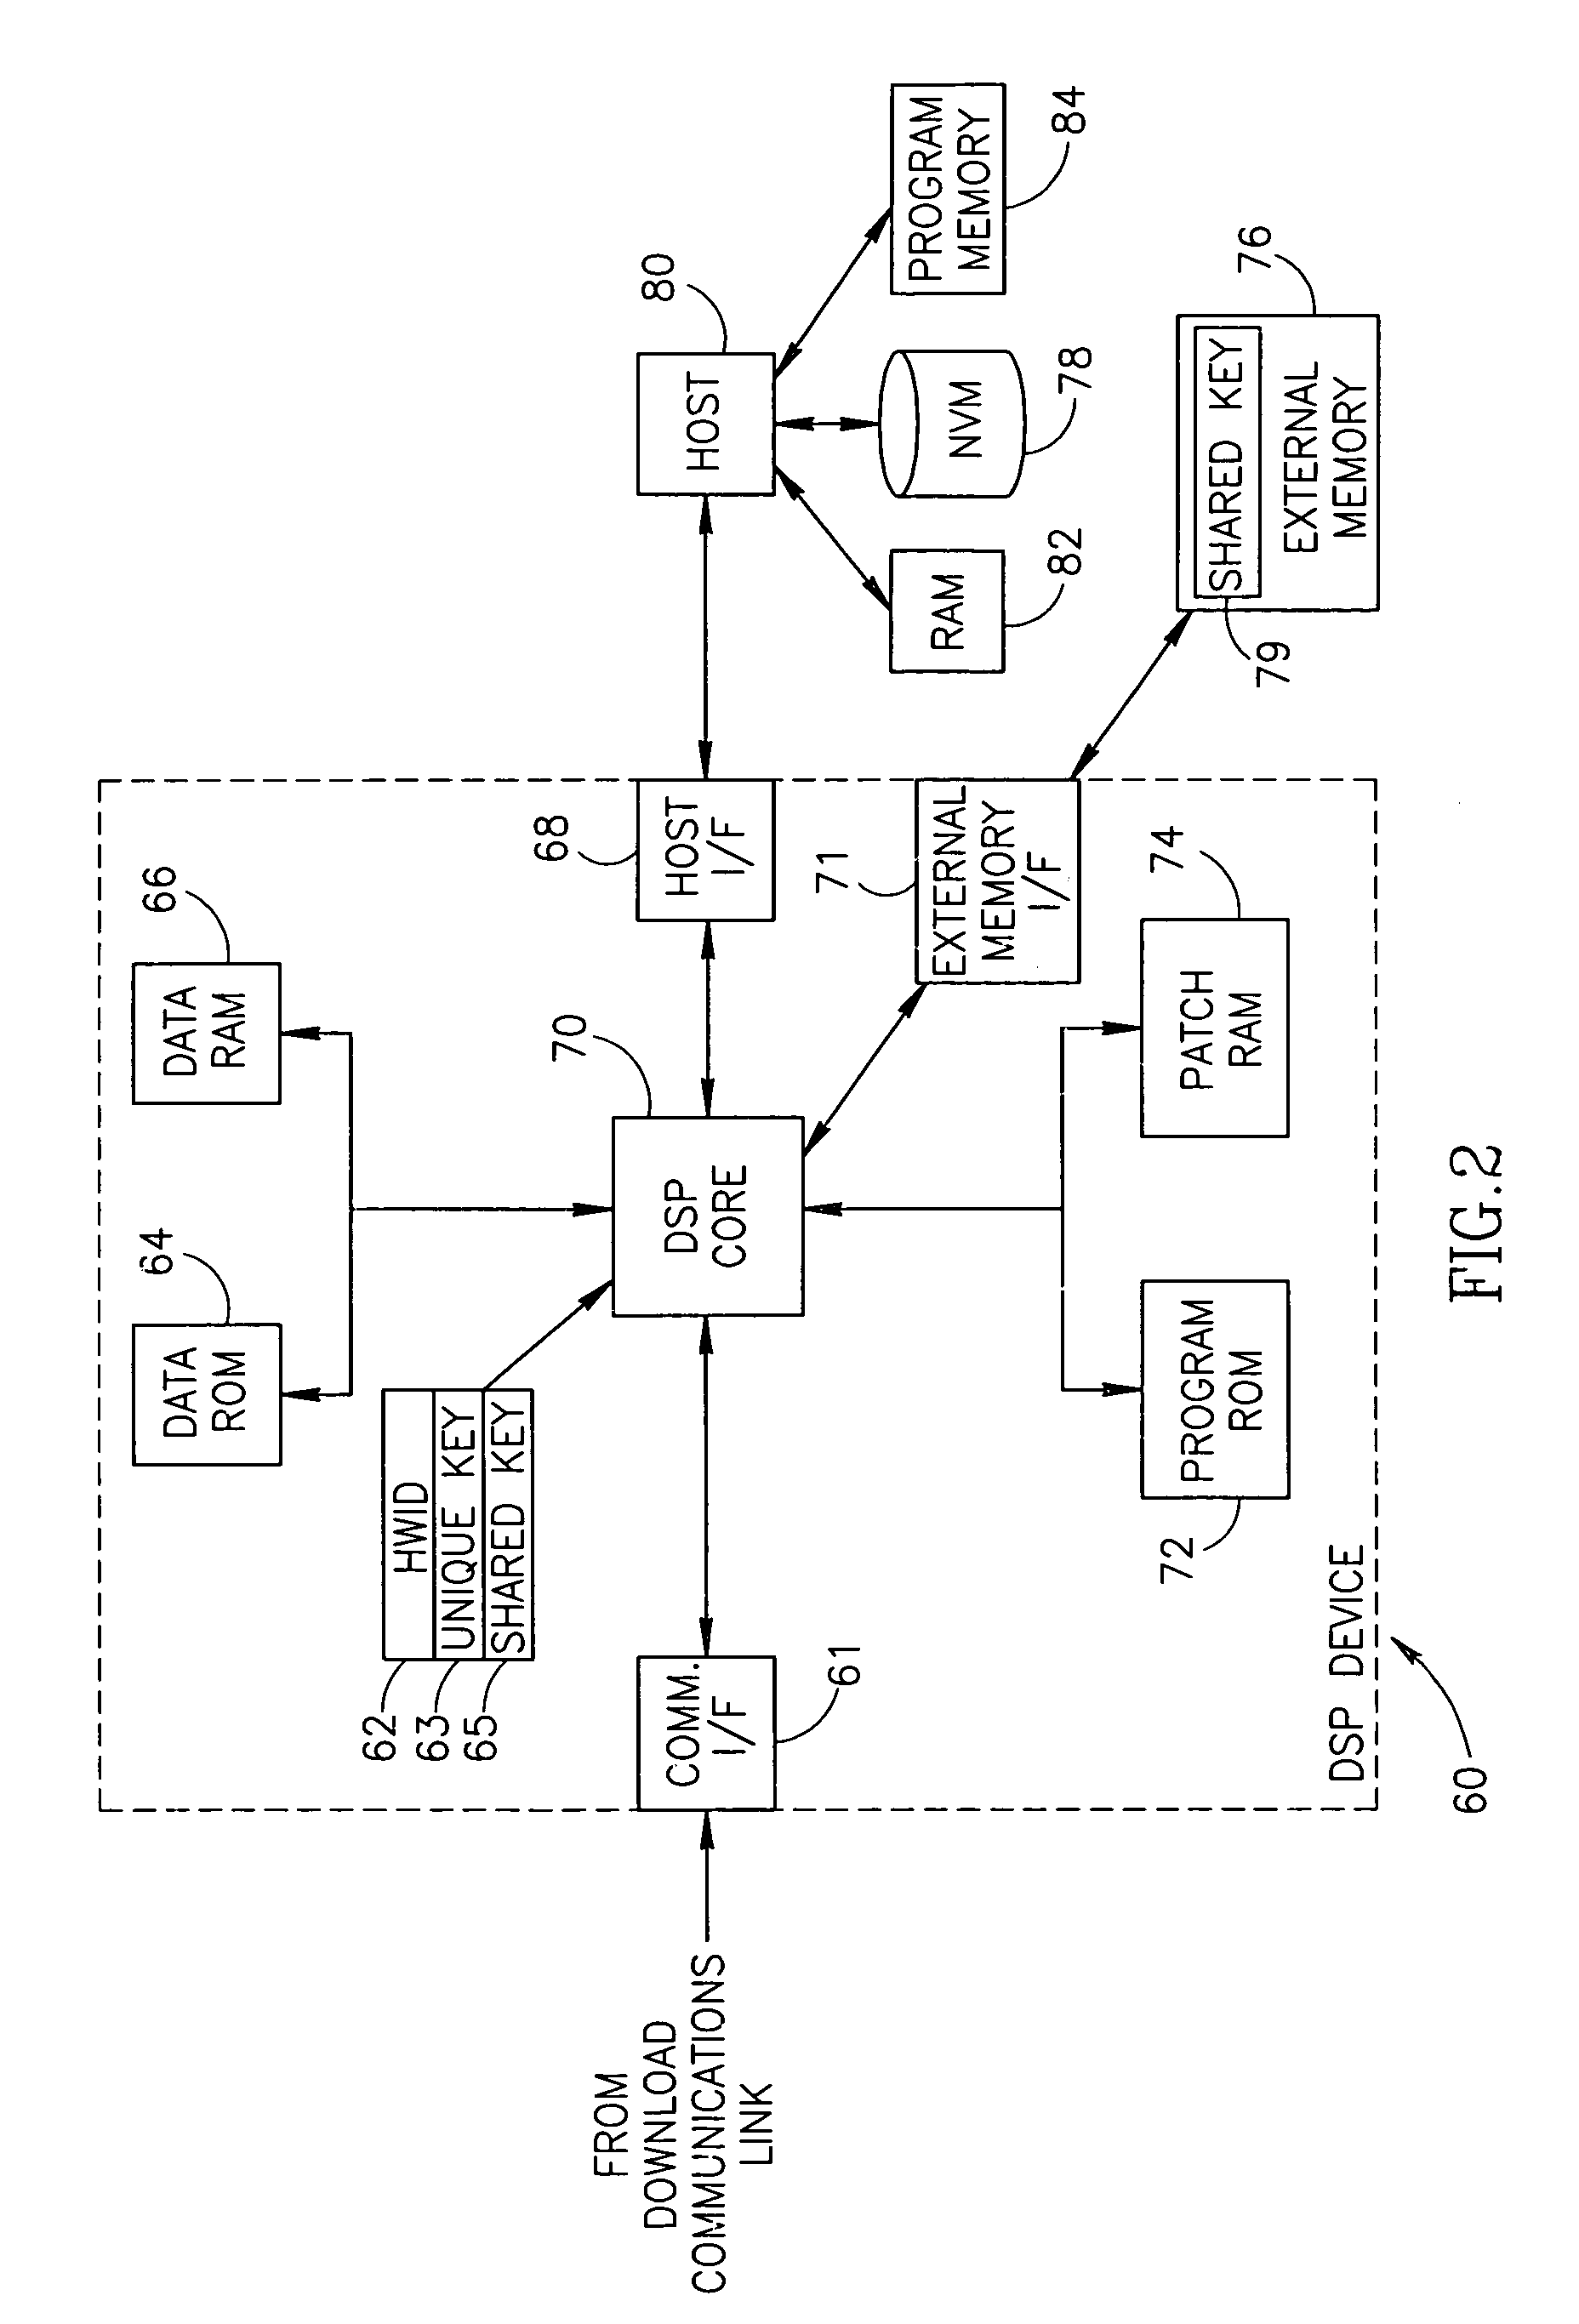 Apparatus for and method of securely downloading and installing a program patch in a processing device